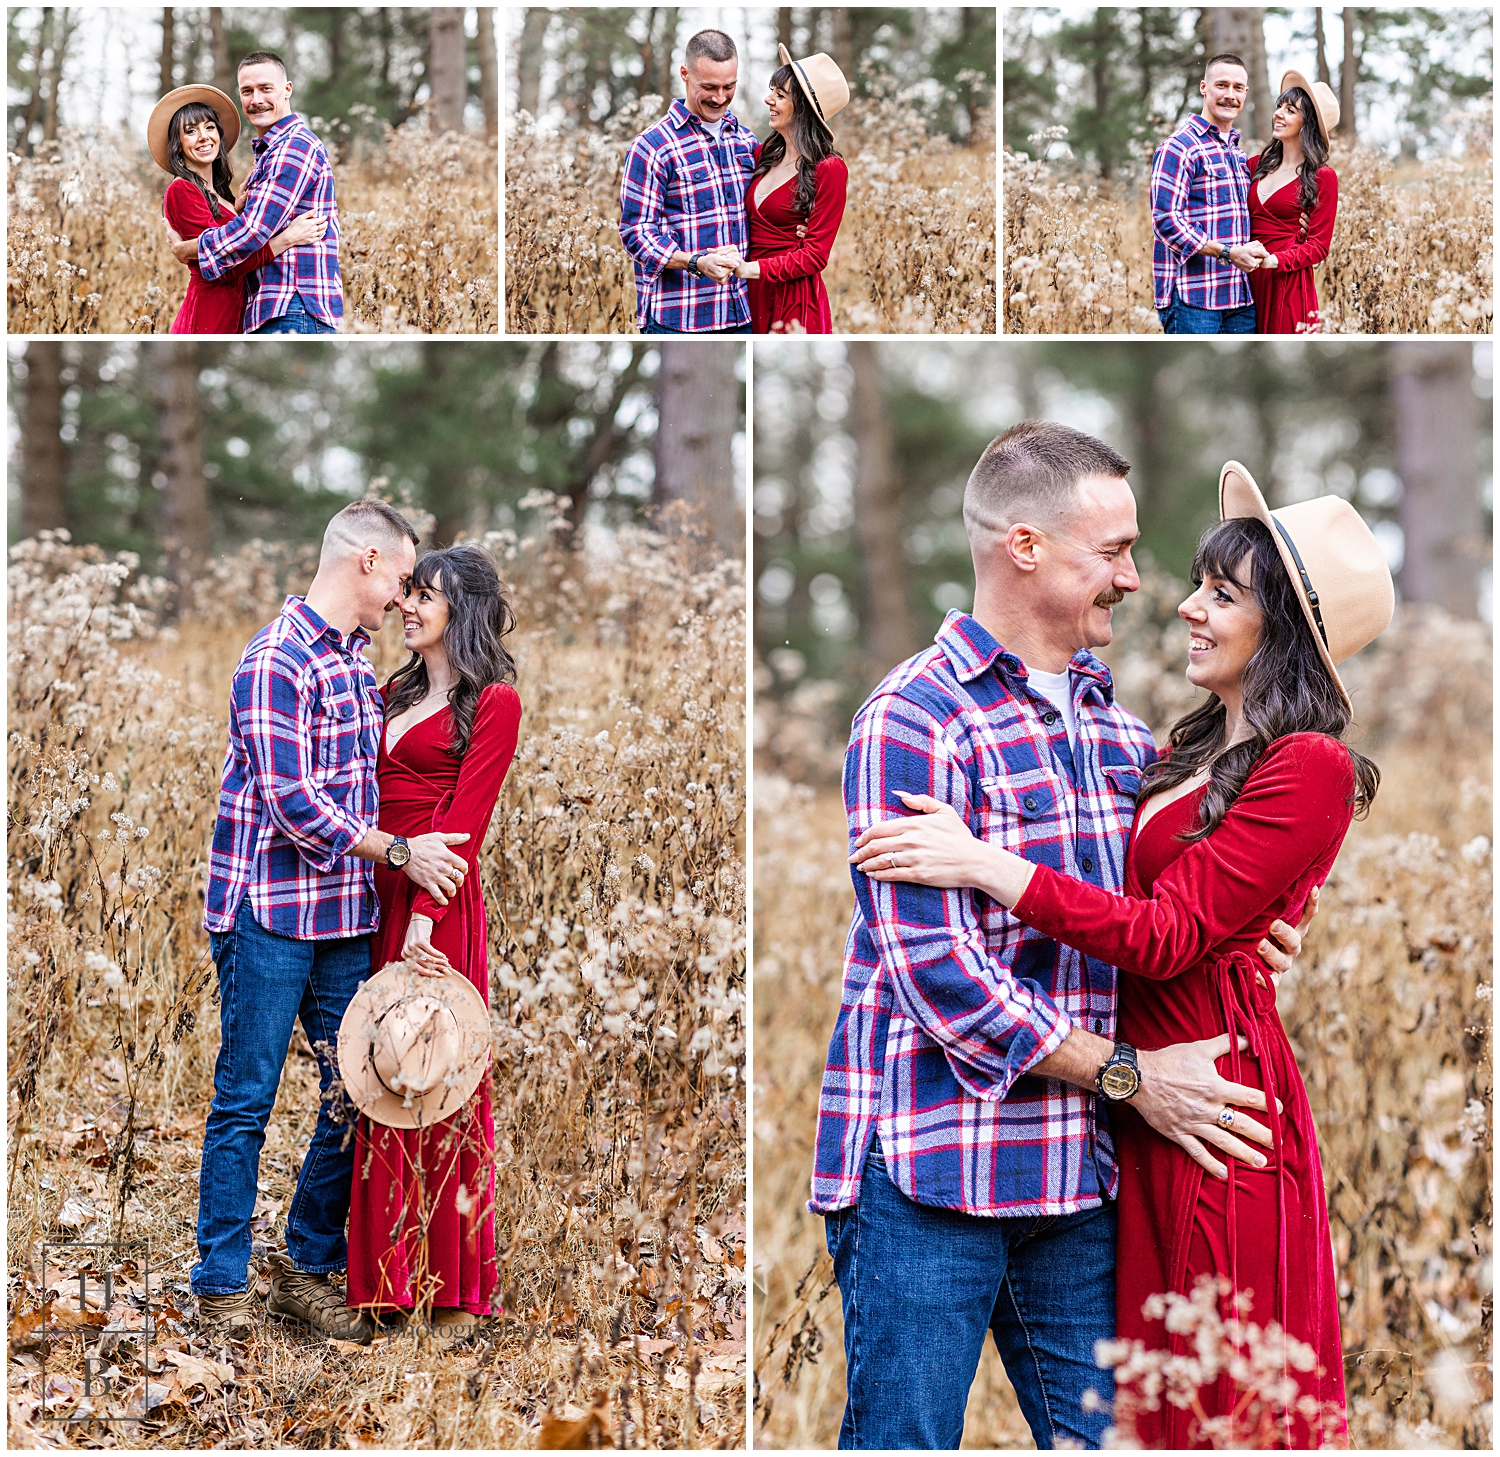 Women in red dress and man in blue flannel pose for holiday engagement photos.